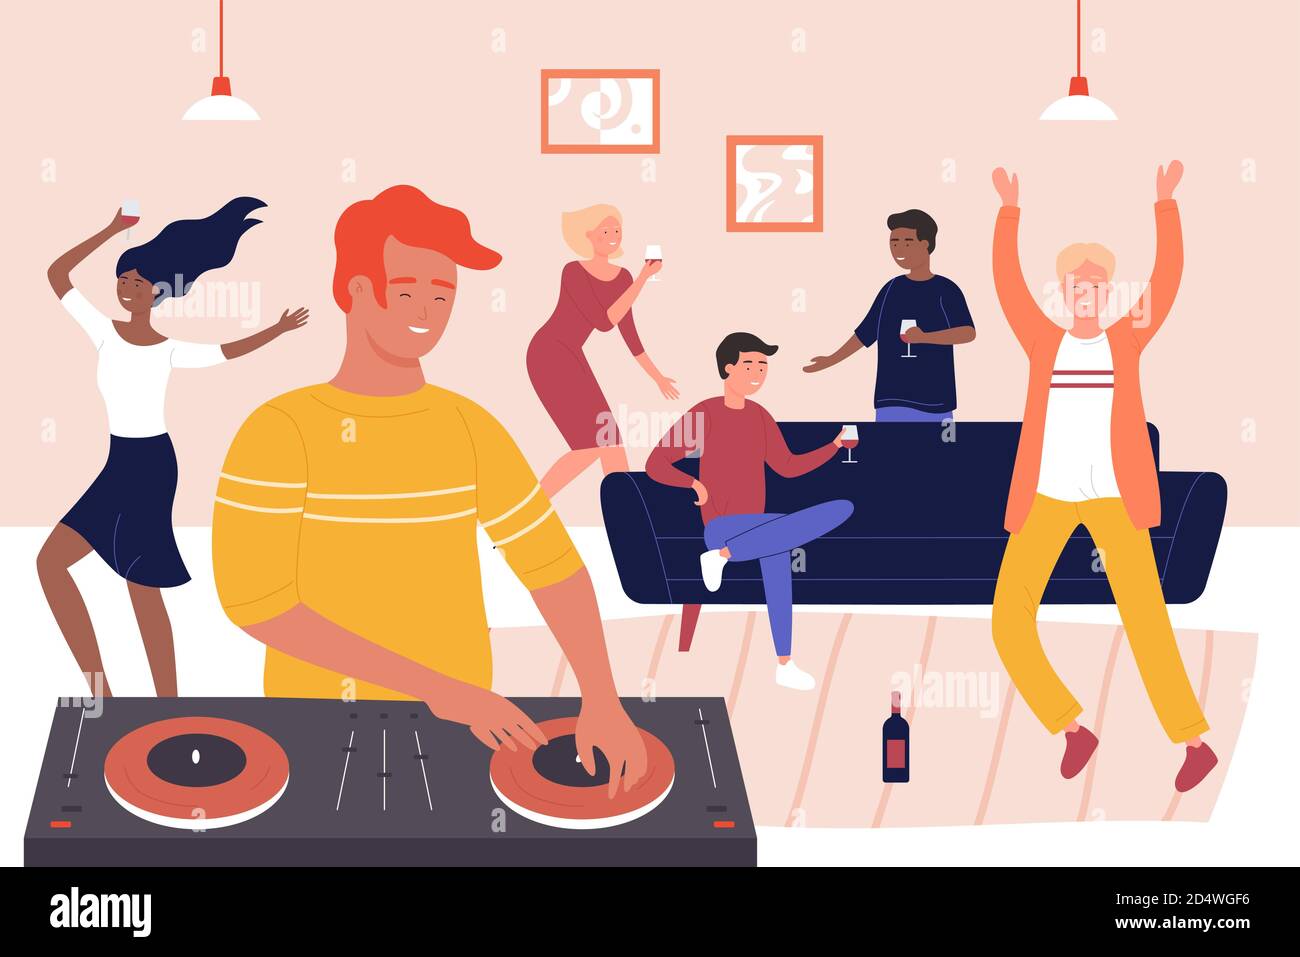 Happy friends musical party with DJ vector illustration. Cartoon young hipster DJ character mixing modern digital music on turntables equipment, people dancing, drinking wine at home party background Stock Vector